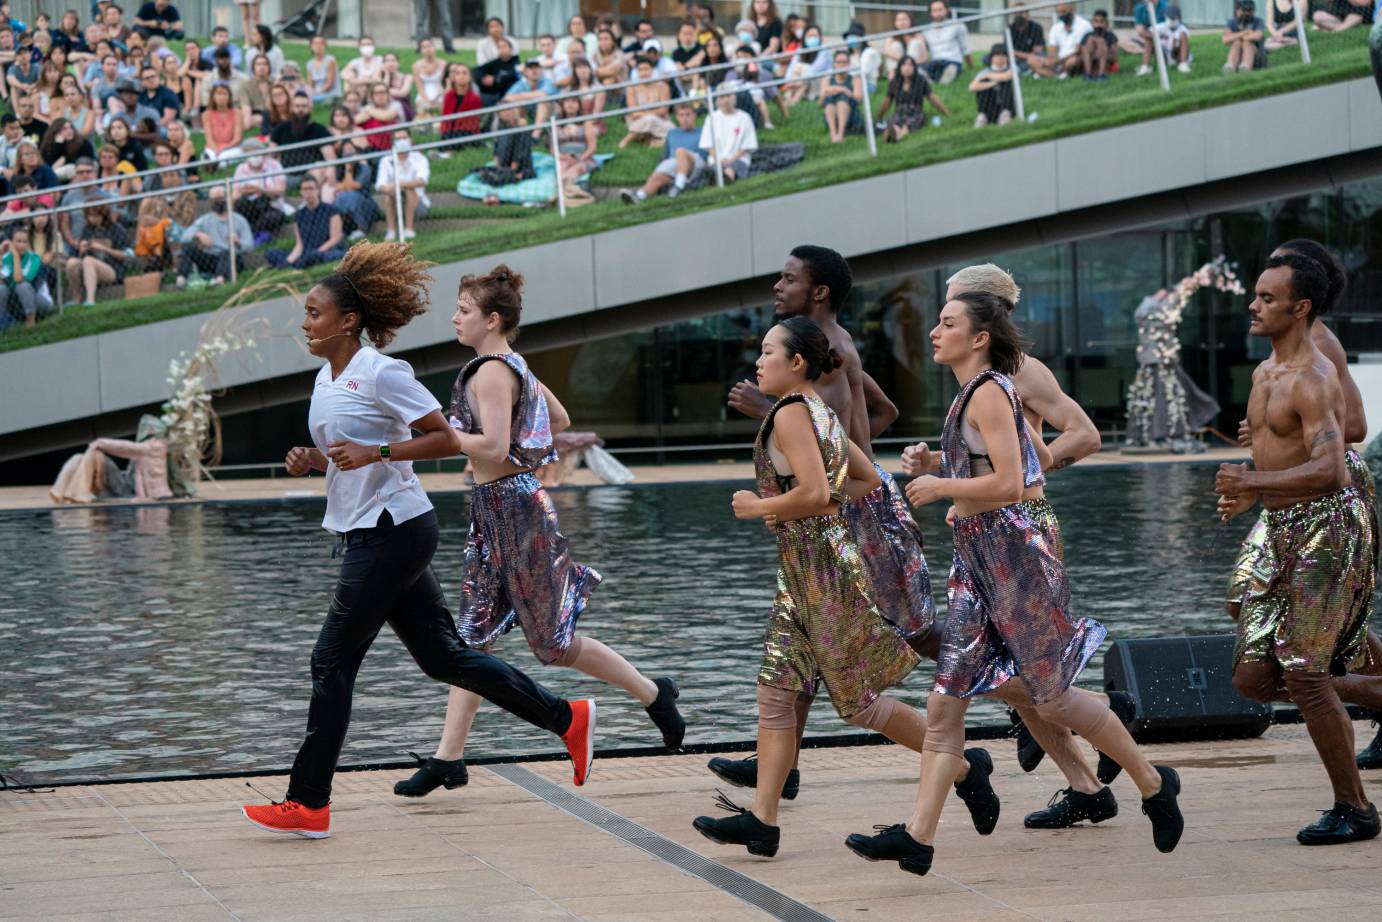 In red sneakers, Valarie Wong runs as a pack of metallic-clad dancers follow her